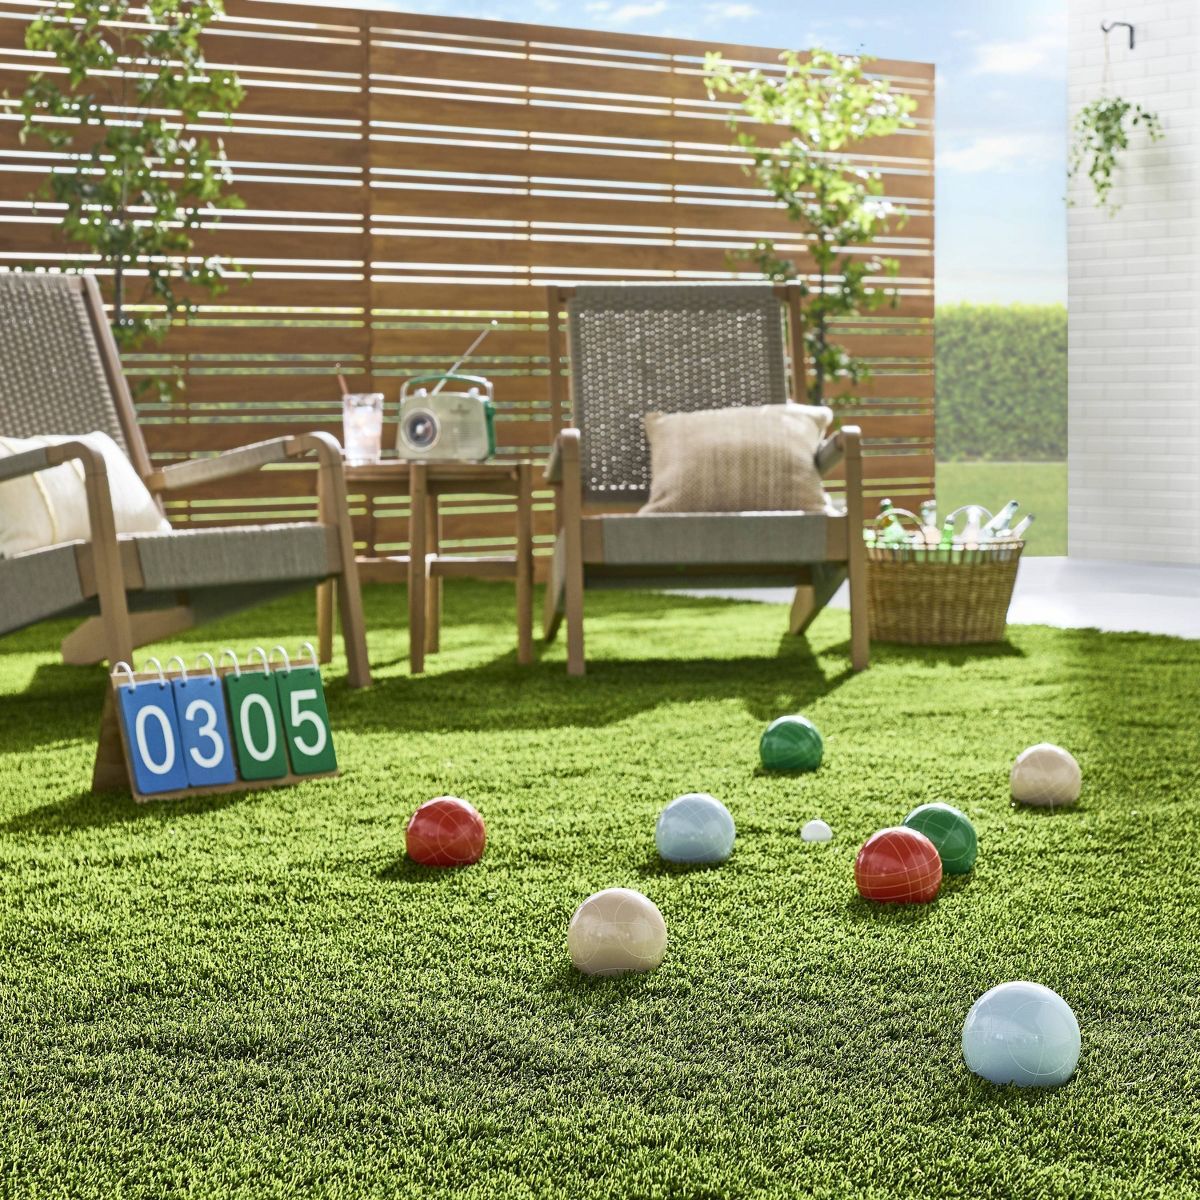 Lawn Game Scoreboard - Hearth & Hand™ with Magnolia | Target